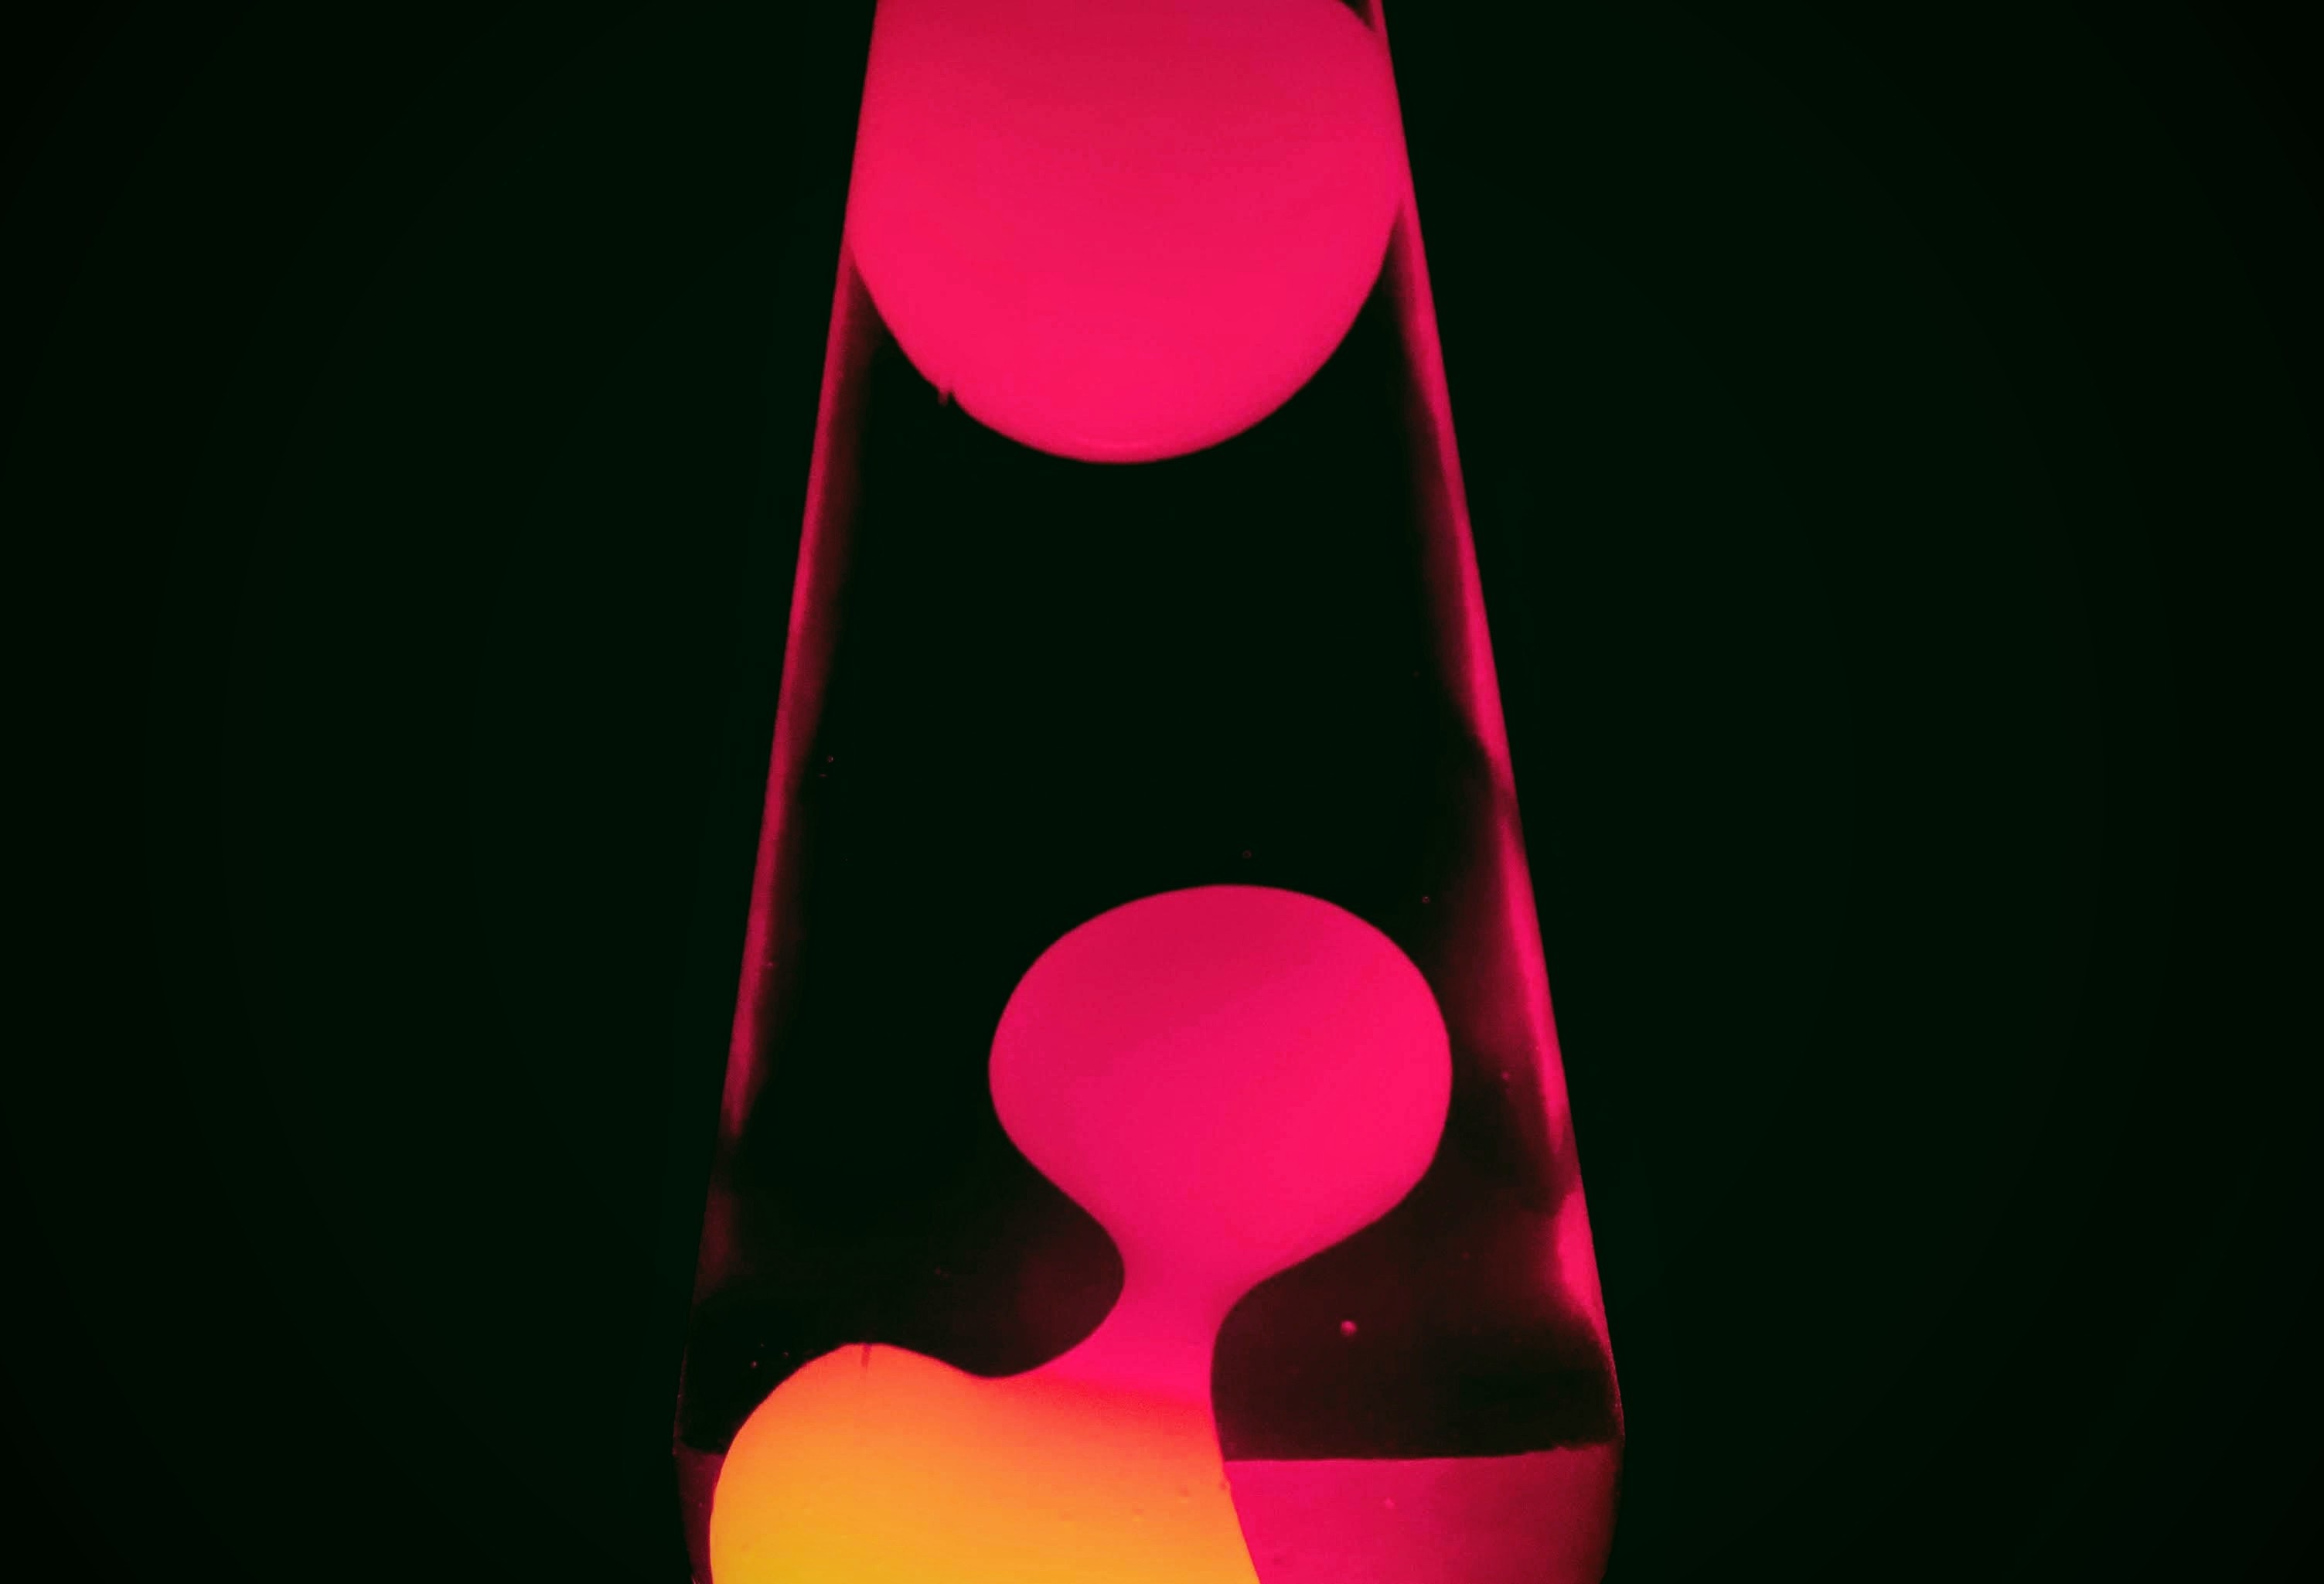 Photo by Em on Earth: https://www.pexels.com/photo/melted-wax-in-a-lava-lamp-9163754/